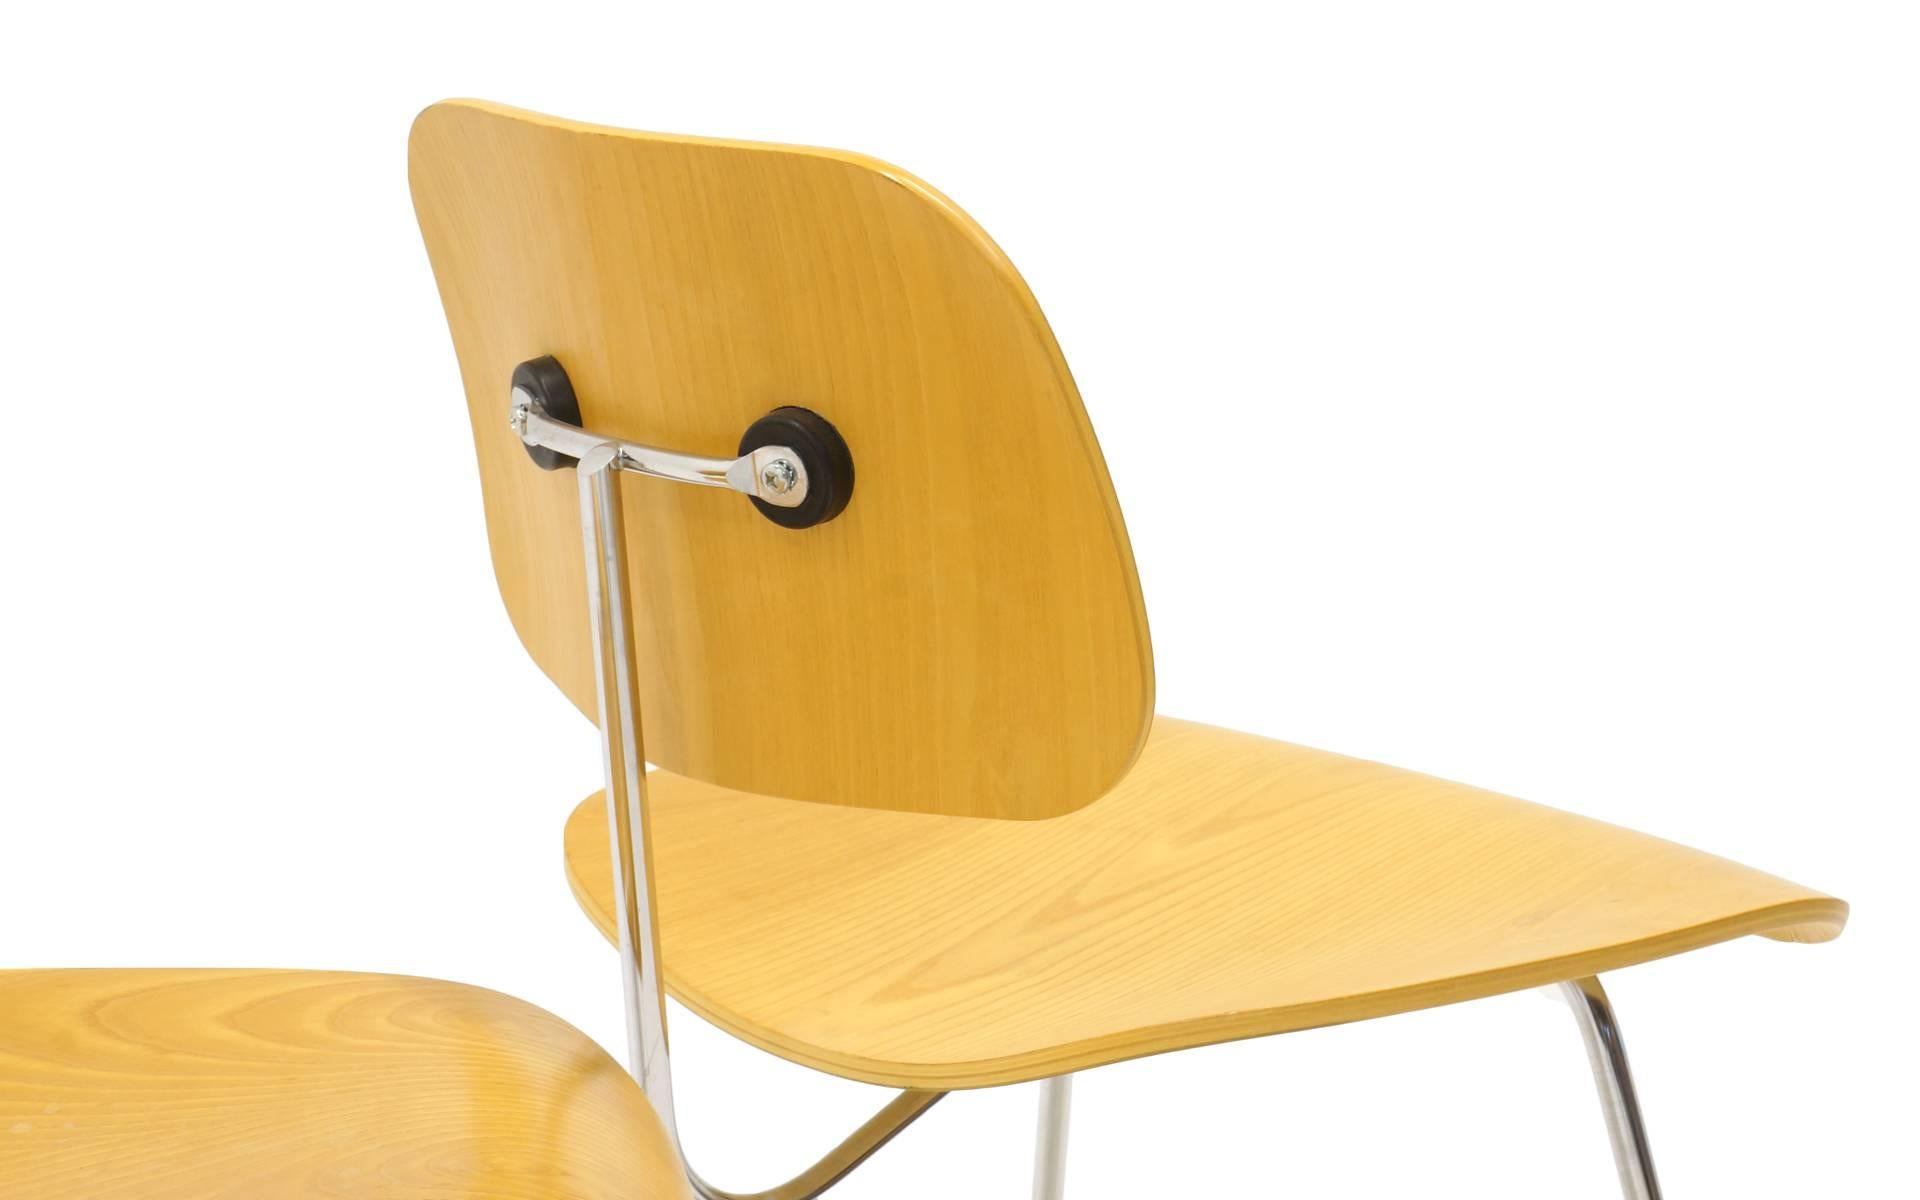 Mid-Century Modern Charles Eames Plywood Dining Chairs, DCMs, Ten Available, Price is for Each